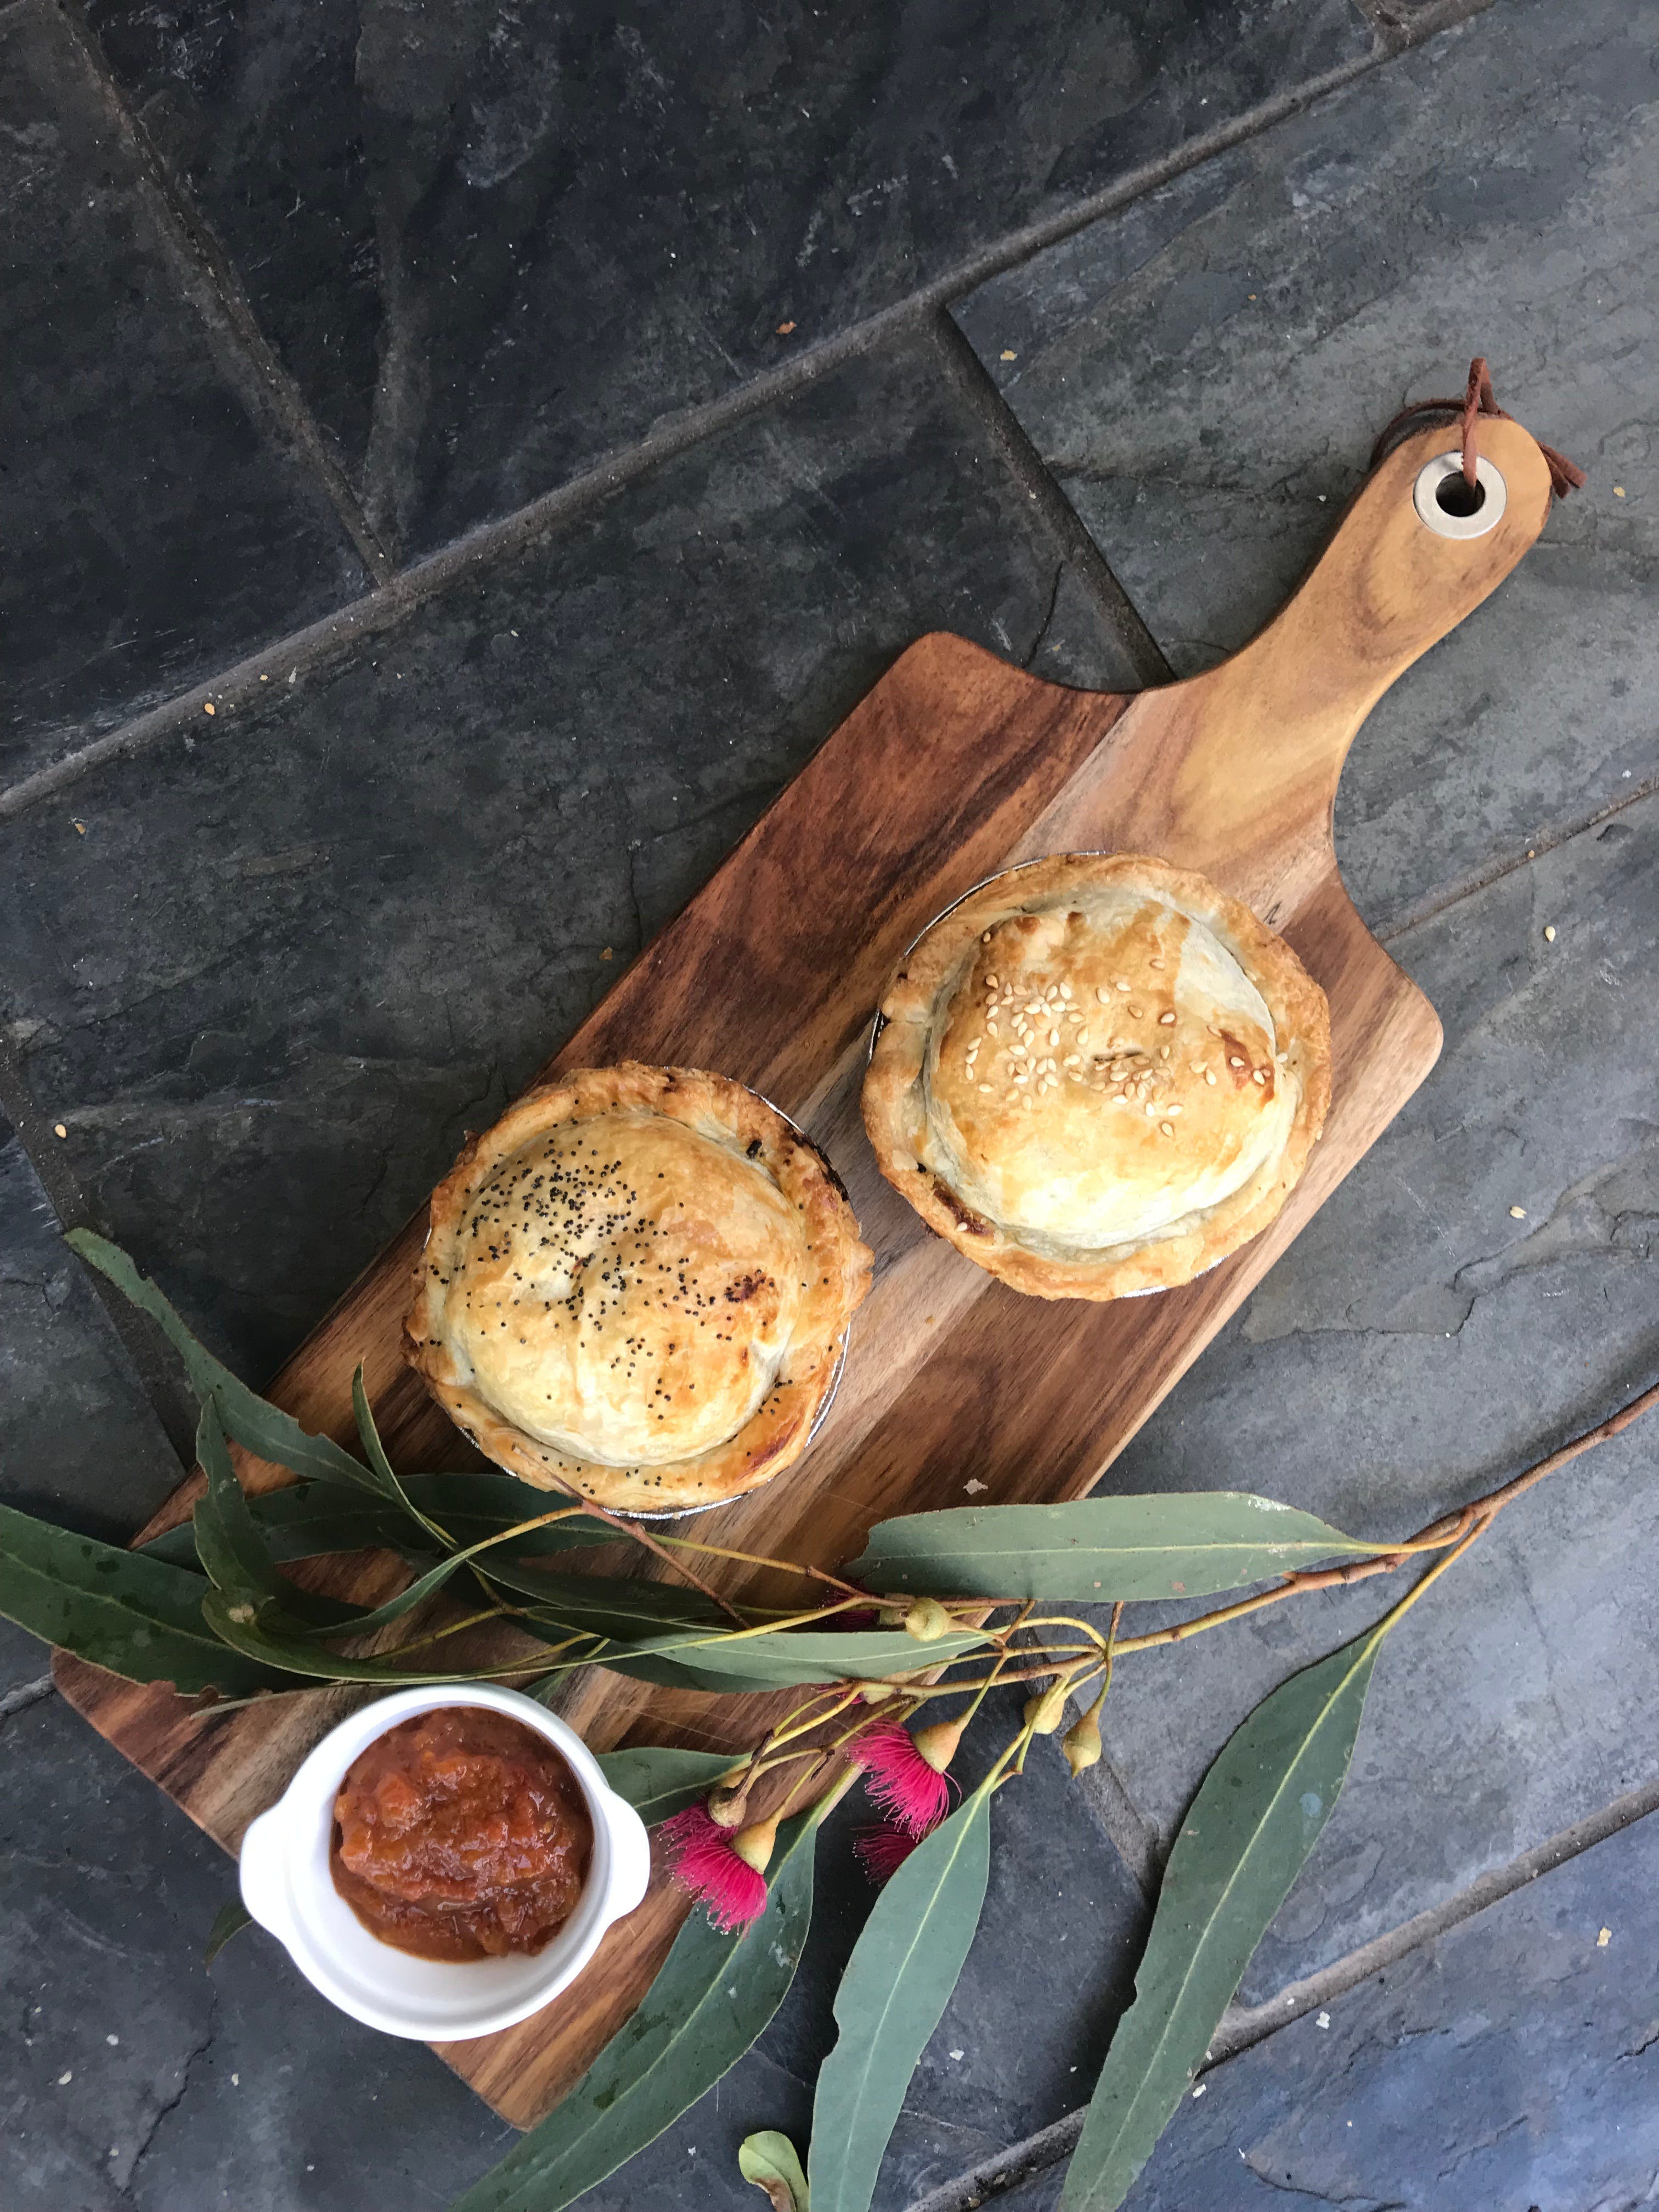 Aged Wine and Vintage Pies - Broome Tourism